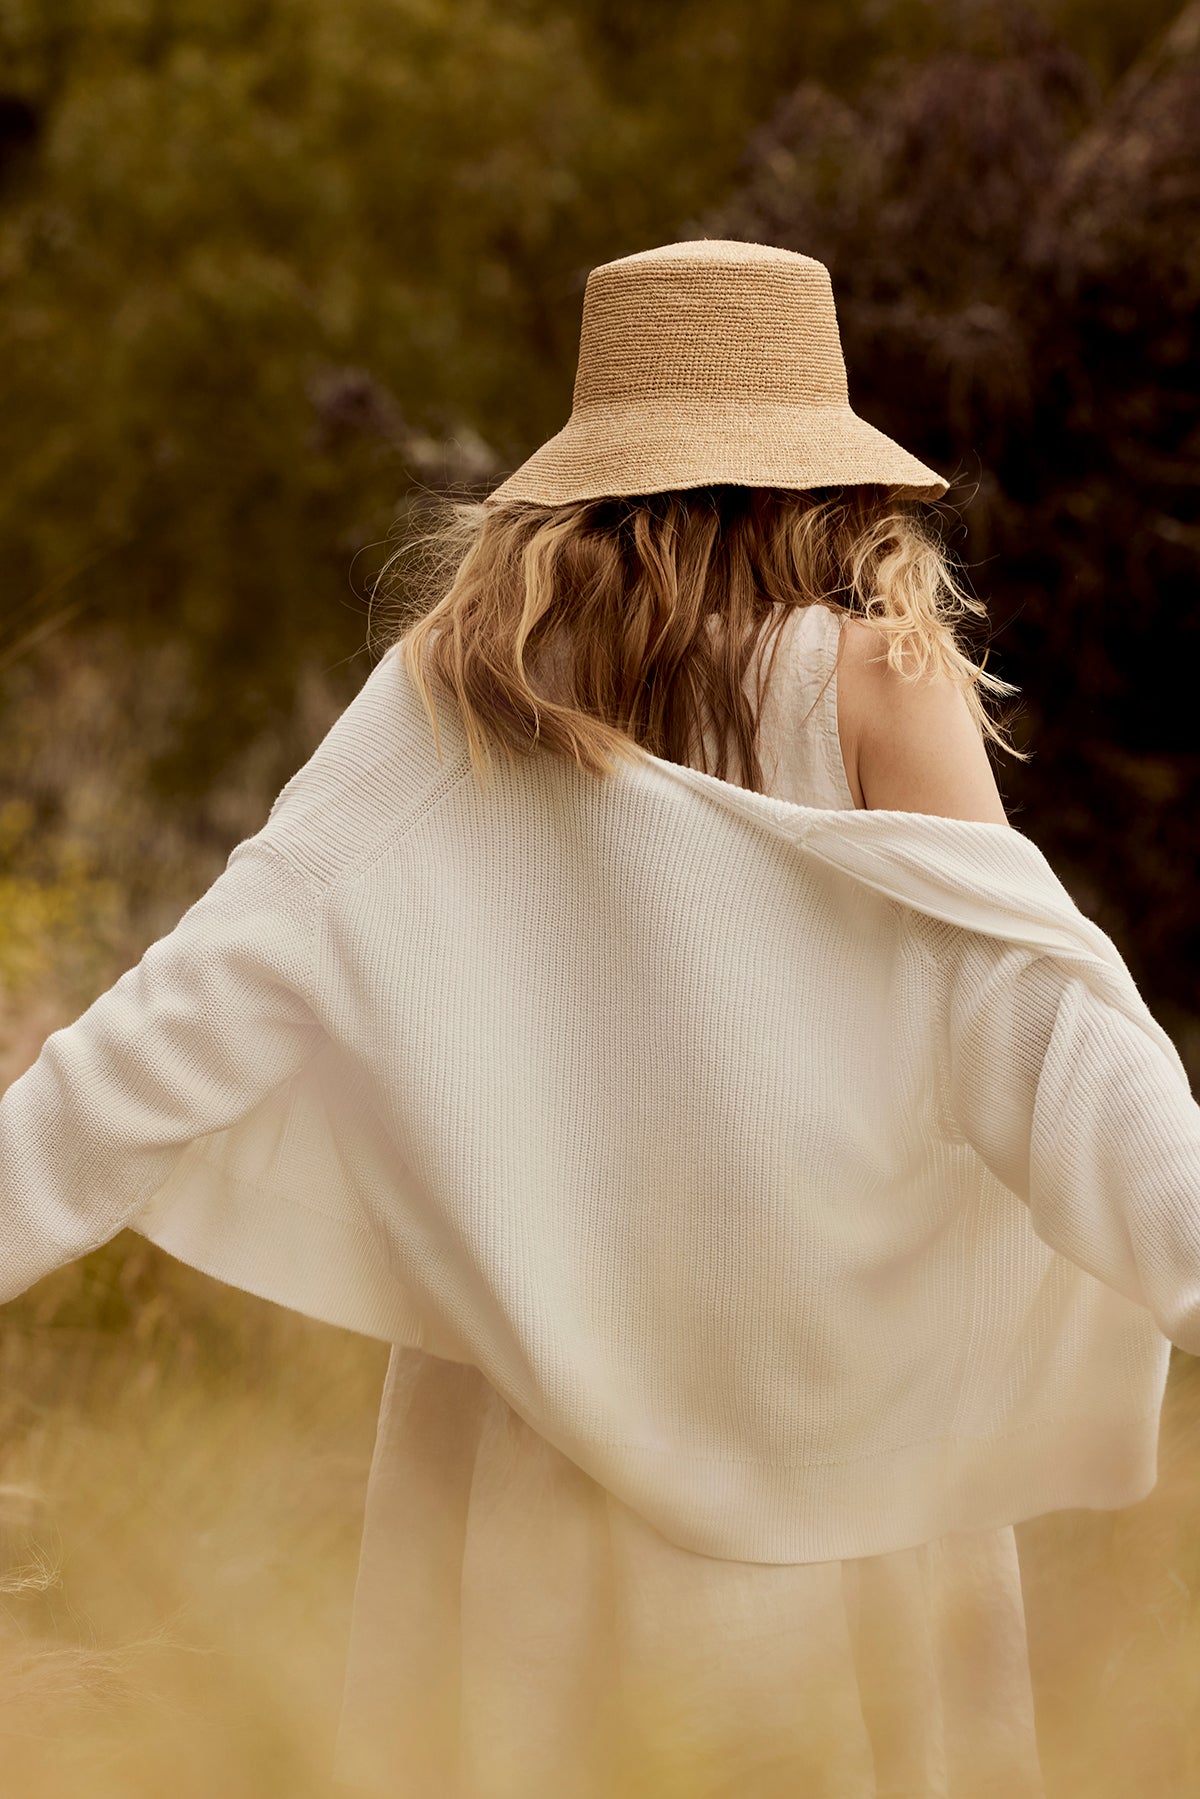 A woman with curly hair, seen from behind, wears a straw hat and a white flowing blouse in a sunlit, grassy field. She has draped over her shoulders a Velvet by Graham & Spencer Tava Cardigan.-36909783056577